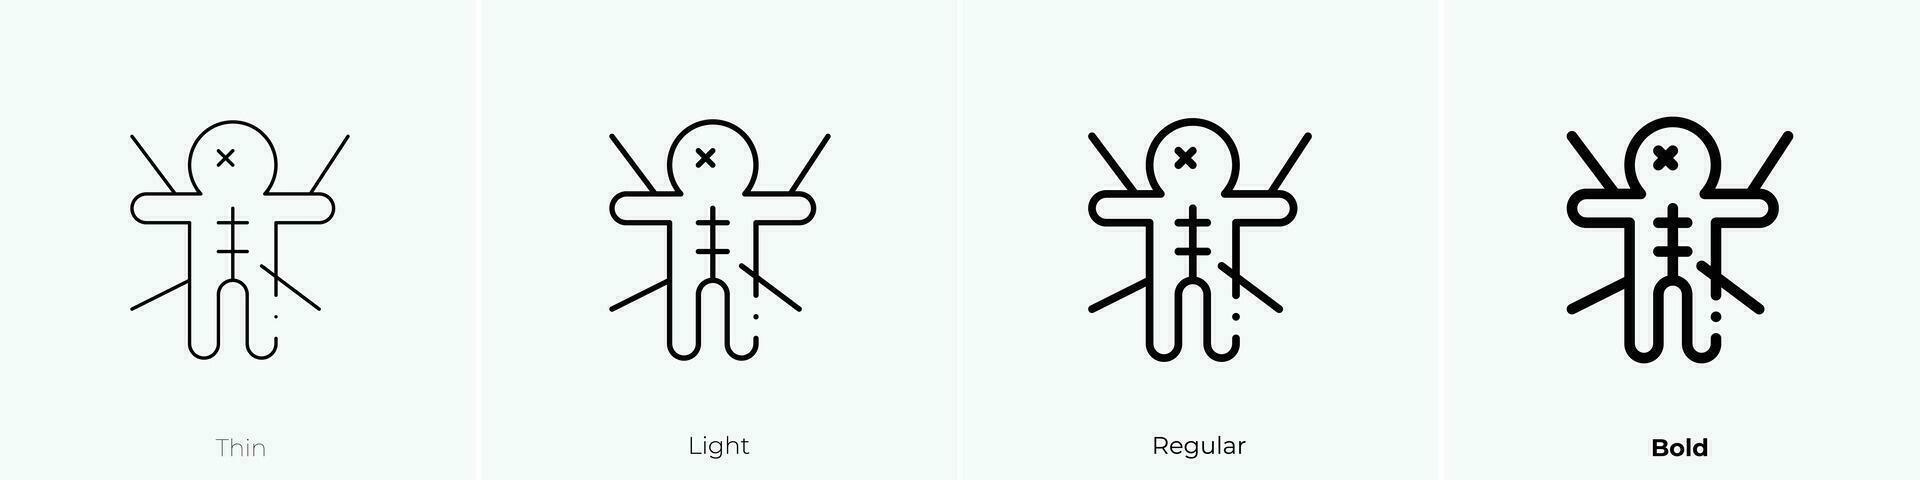 voodoo doll icon. Thin, Light, Regular And Bold style design isolated on white background vector